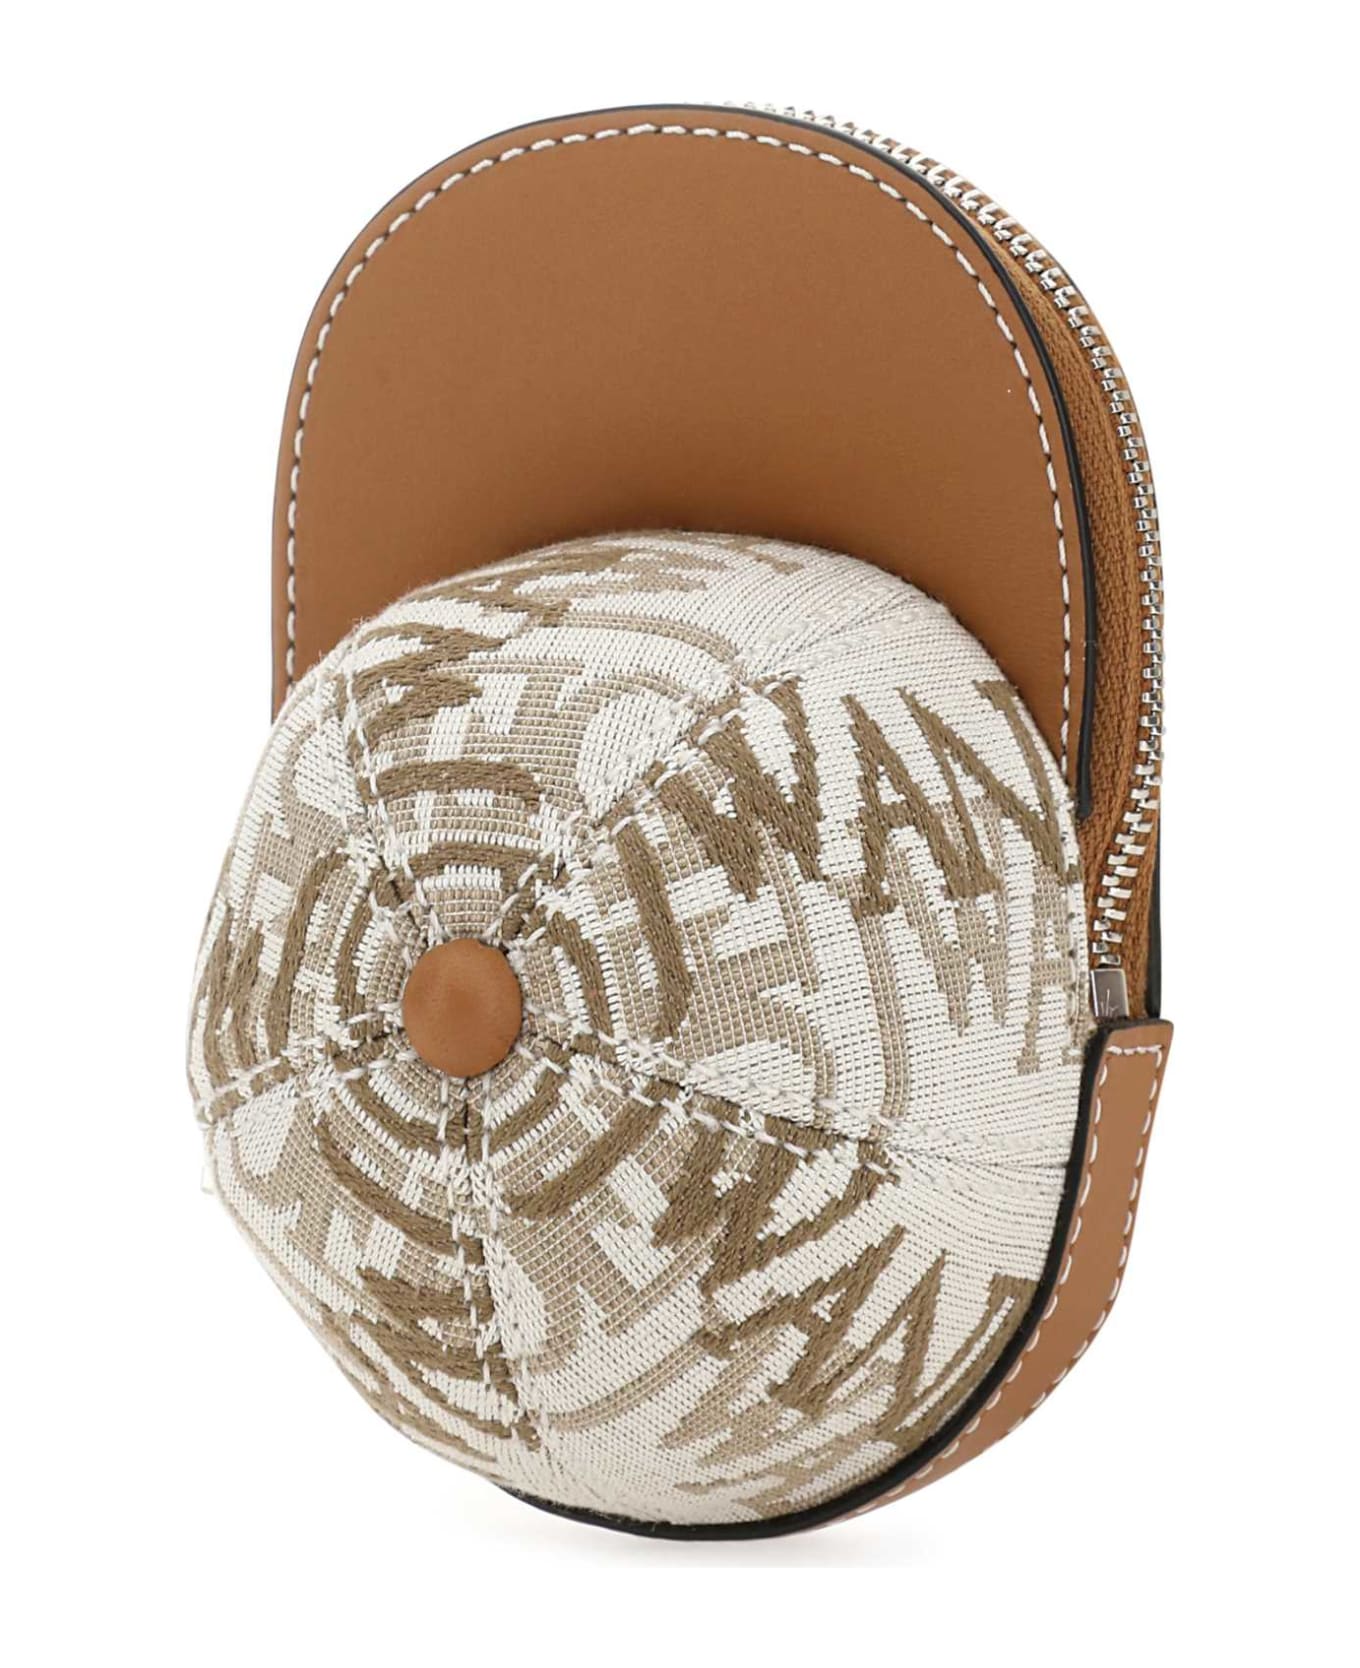 J.W. Anderson Two-tone Canvas And Leather Nano Cap Crossbody Bag - NATURALPECAN